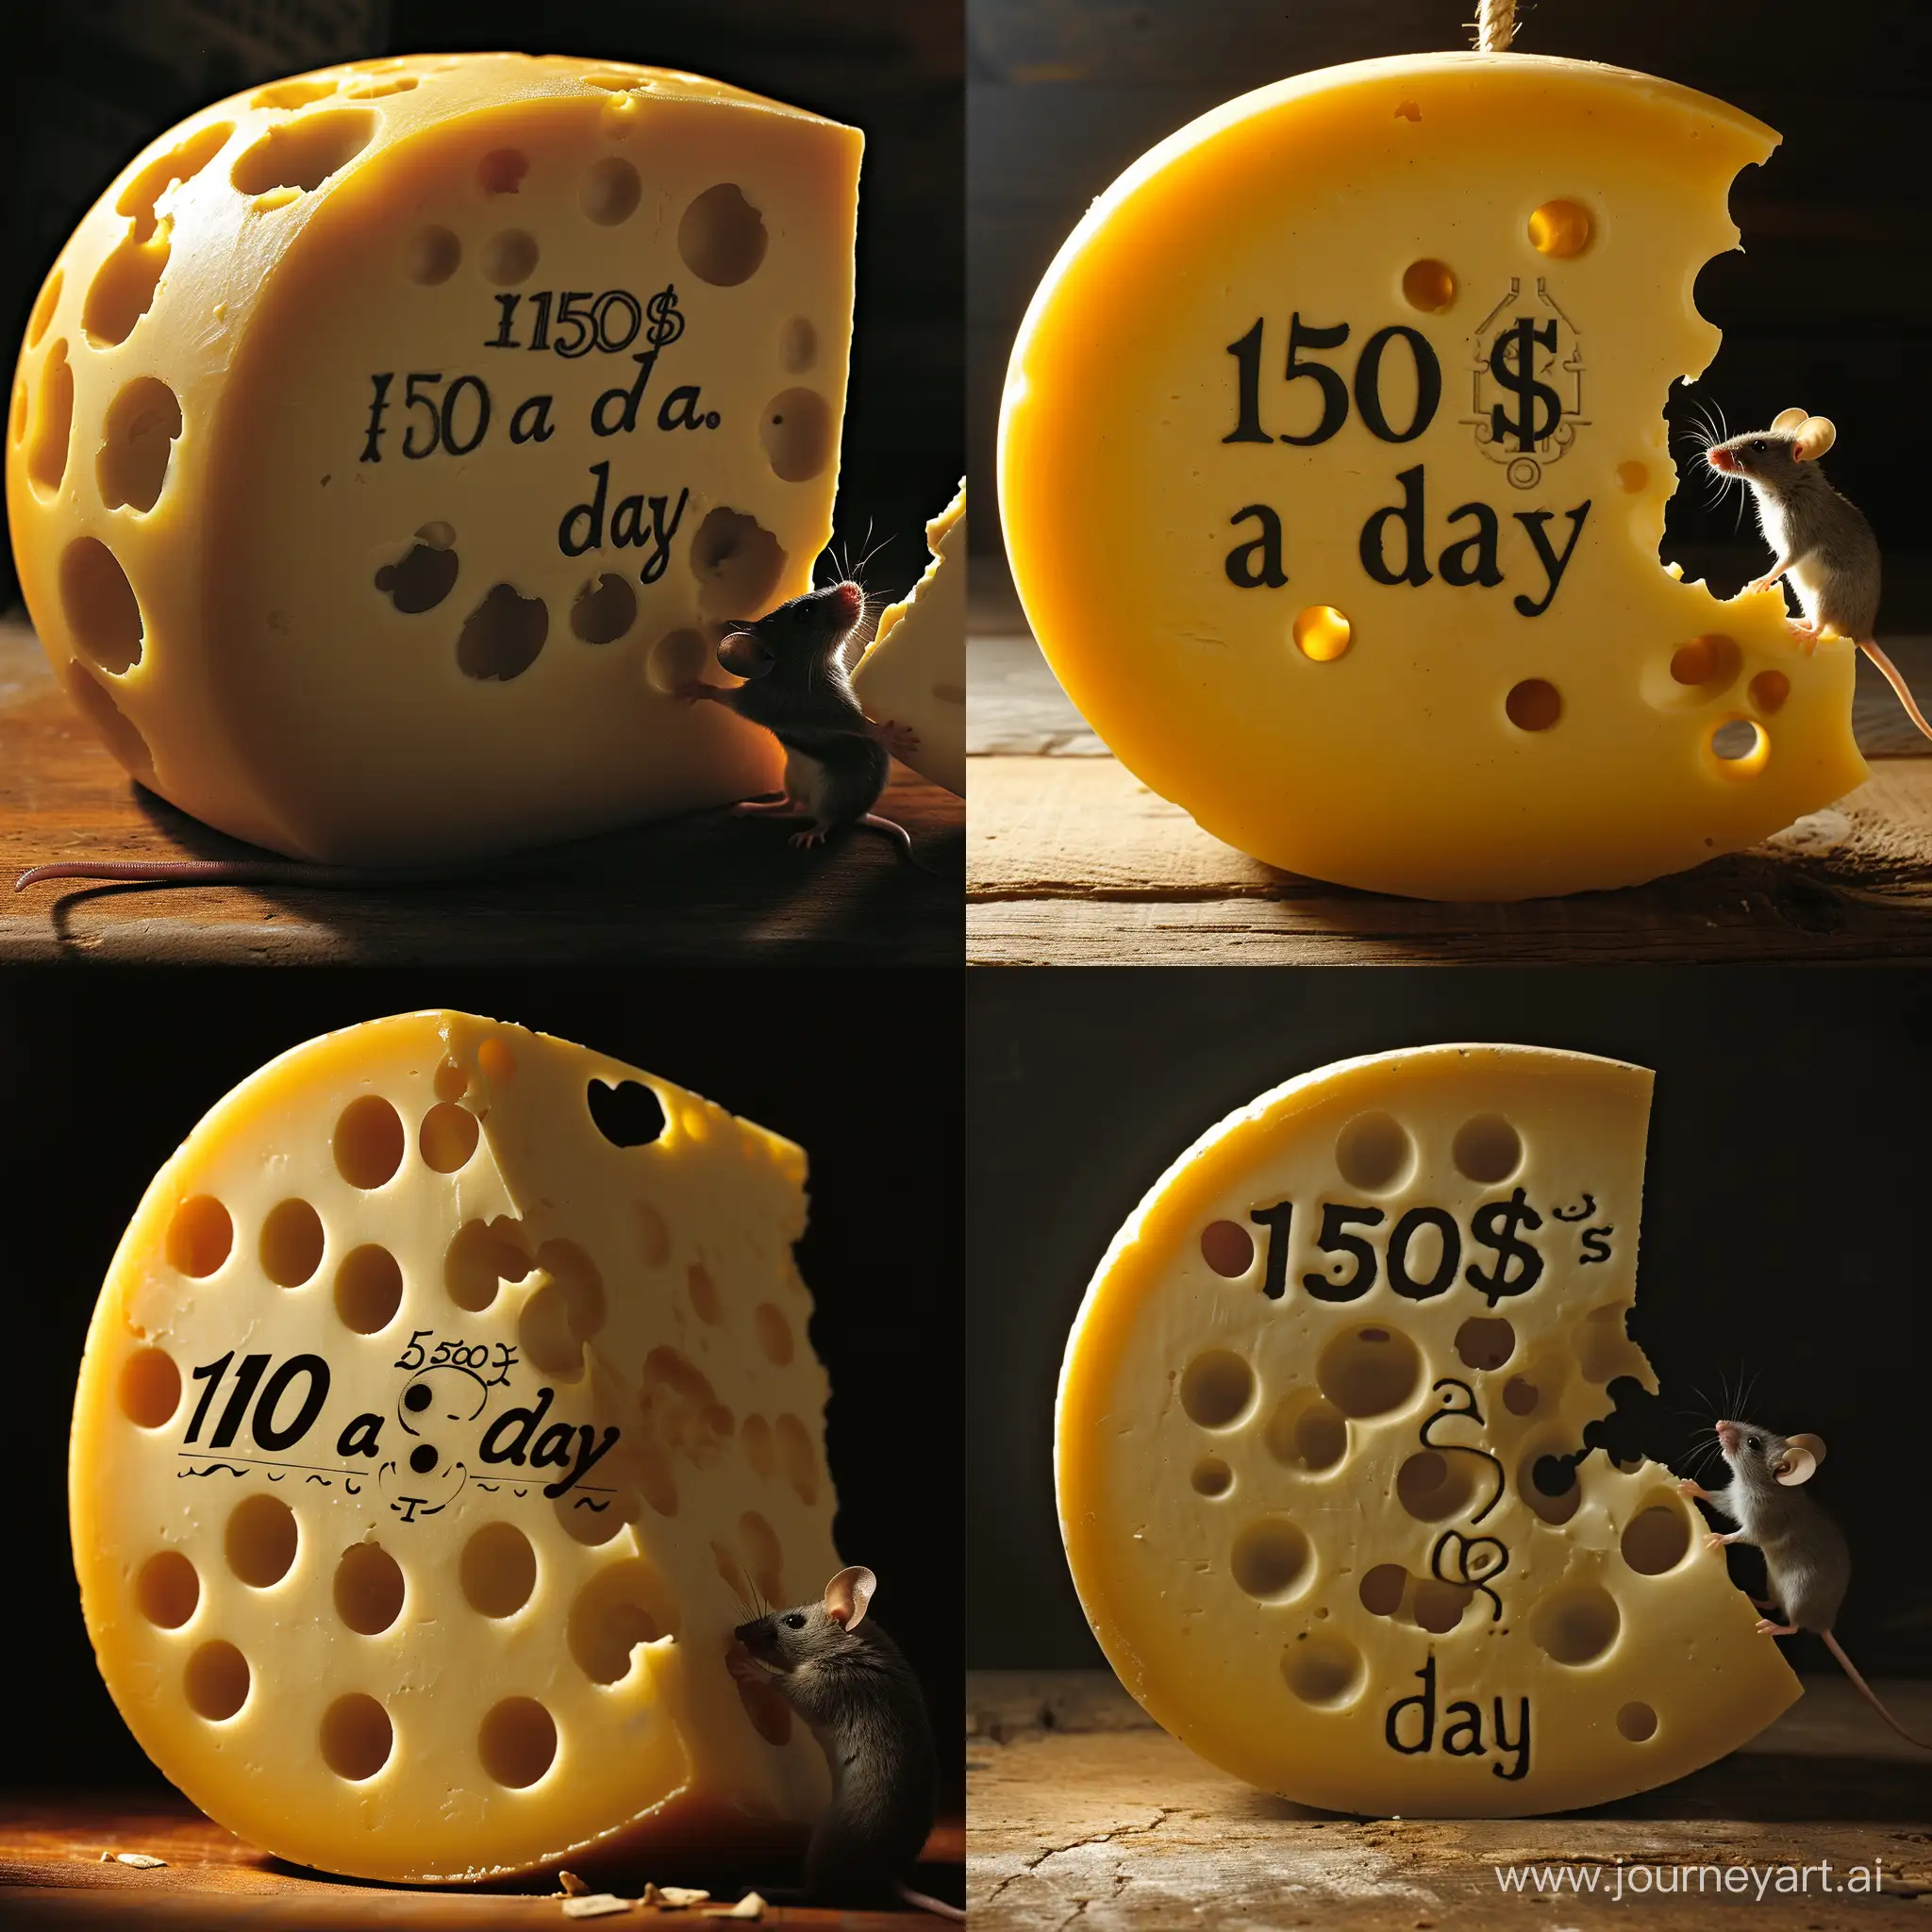 A large round cheese with holes, a mouse bites the cheese on the right, an inscription in the center of the cheese: «150$ a day»